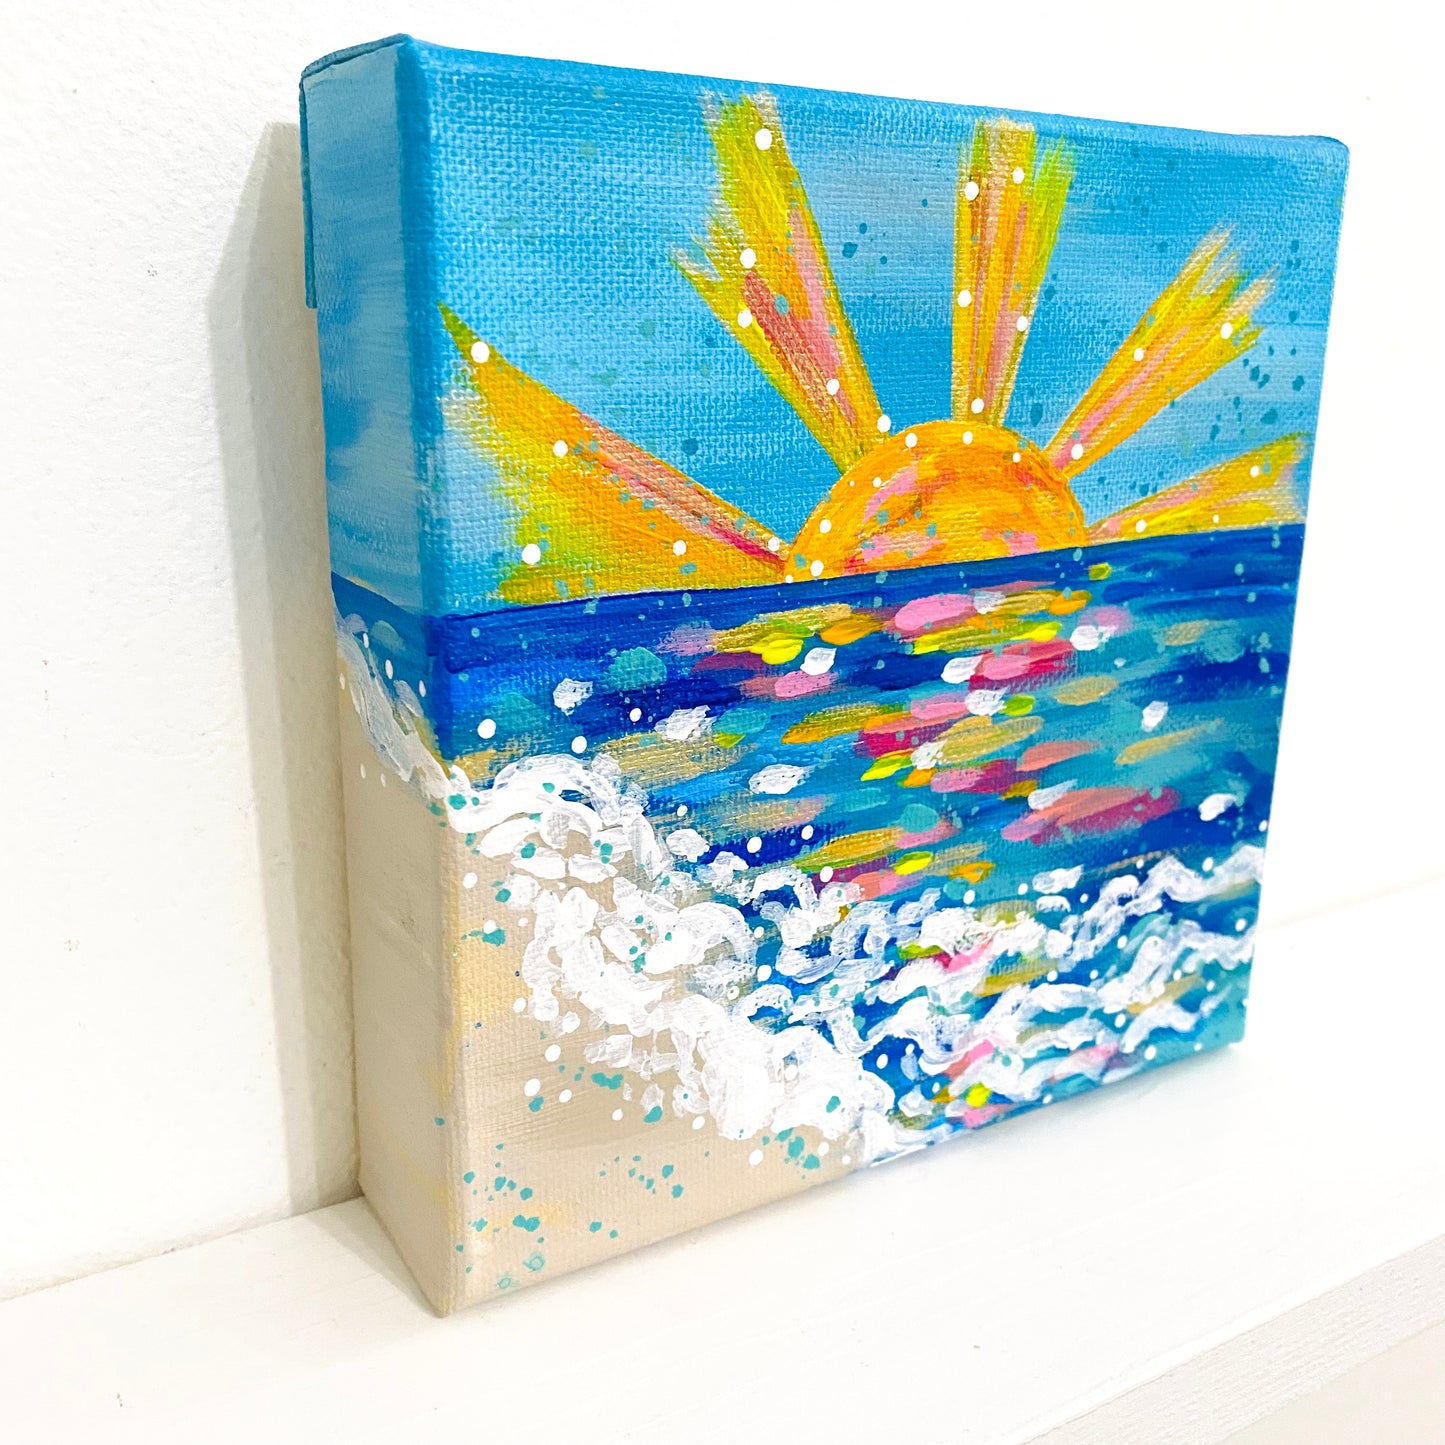 "Shine" 6x6 inch Original Coastal Inspired Painting on Canvas with painted sides